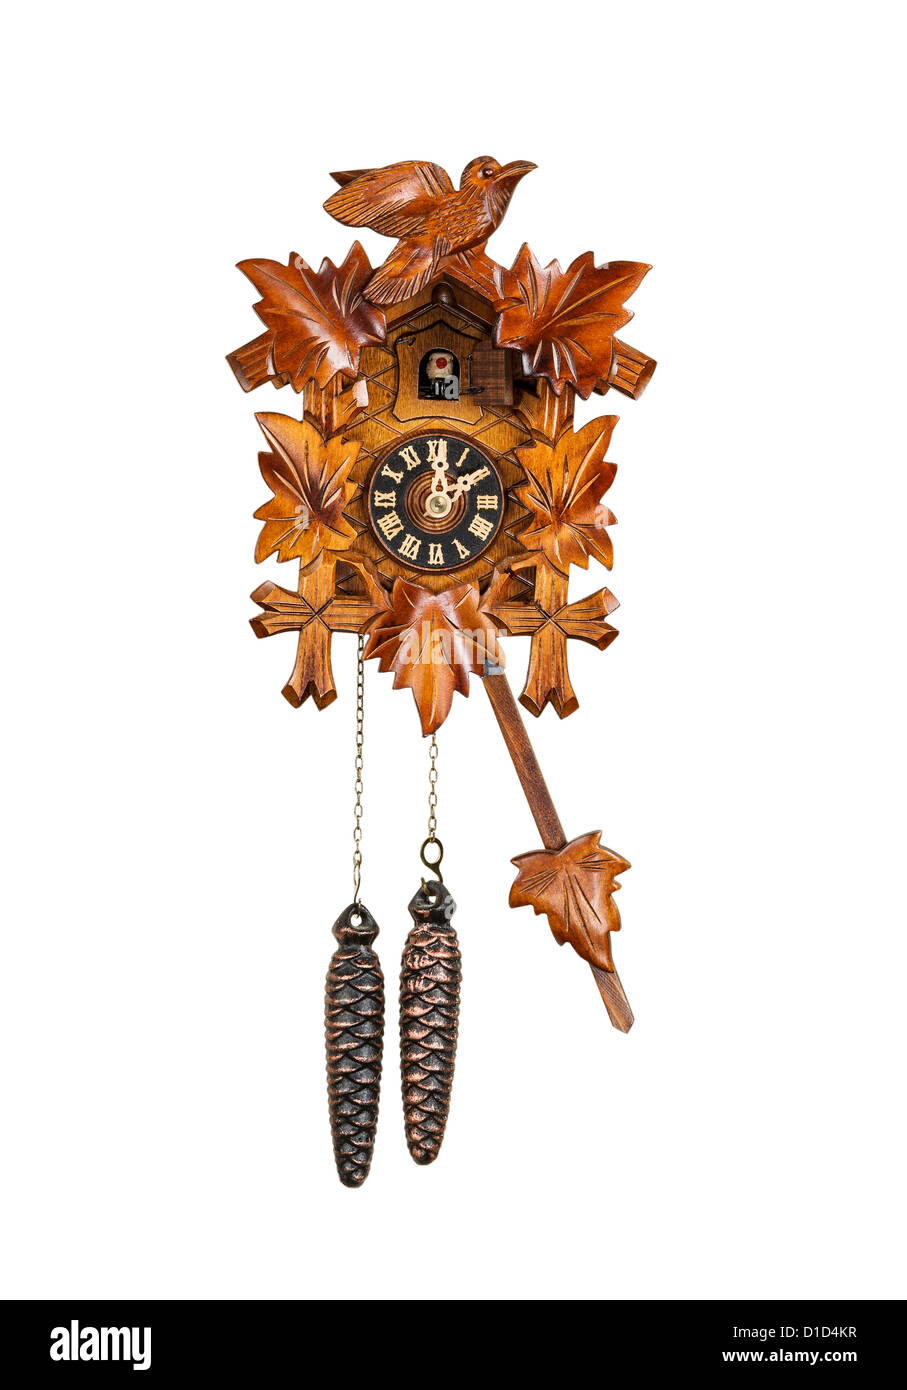 Crafted wooden made cuckoo clock with birdie out of house at 2 O'Clock position with arm in swing motion on white background Stock Photo